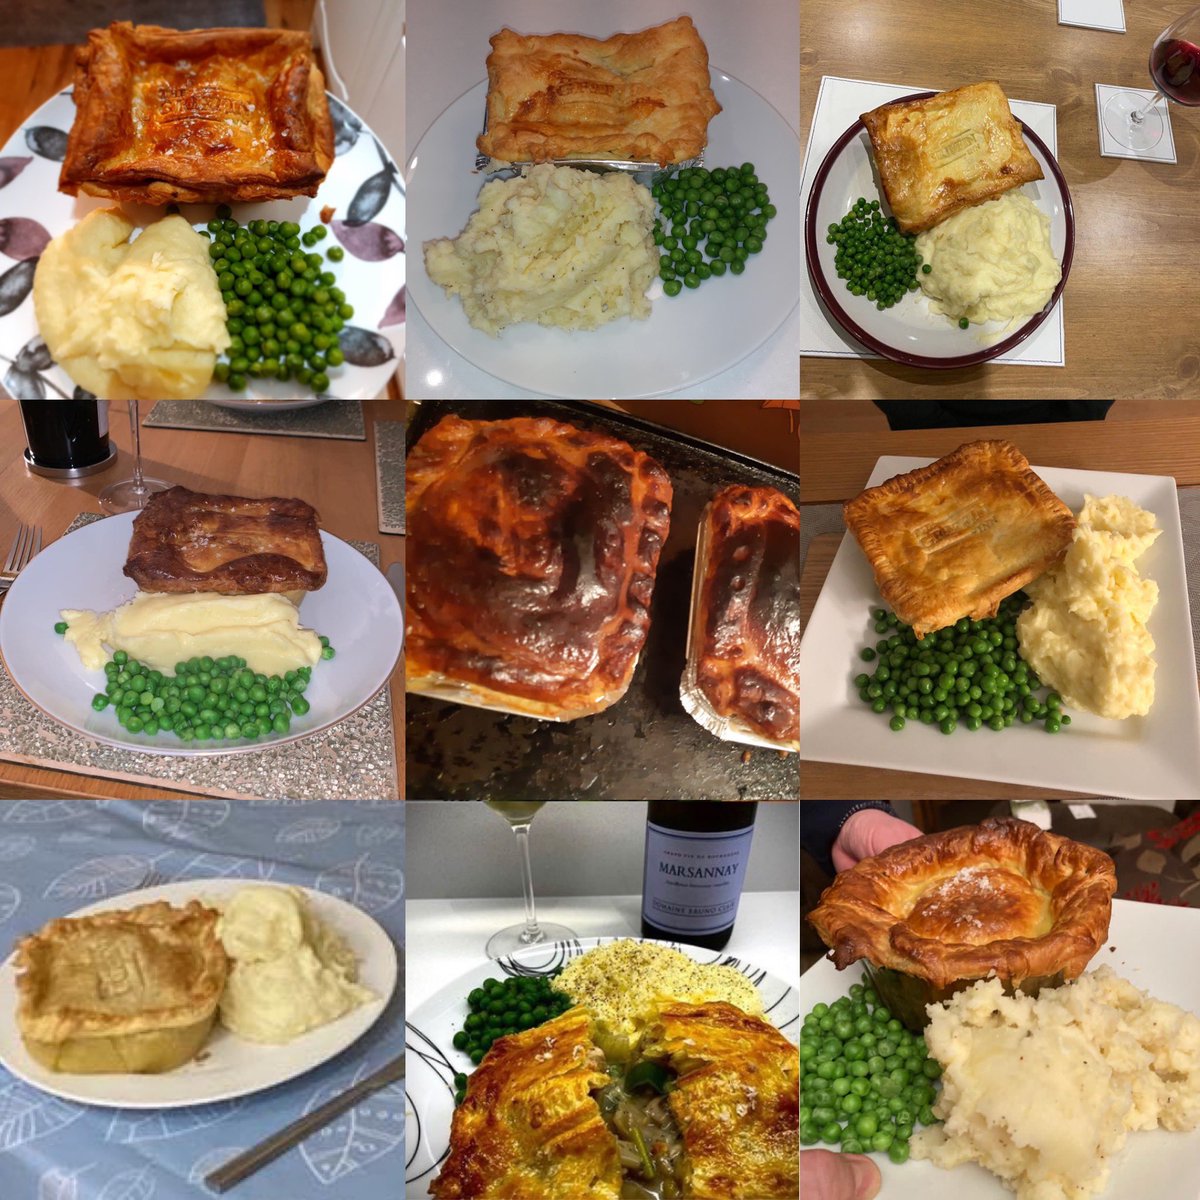 Lovely to see everyone’s pies from this evening’s cookalong #britishpieweek #chef #cookalong #foodies #thegriffininn #griffin #griffininn #griff #sustainablerestaurantassociation #aahospitality #waitrosegoodfoodguide